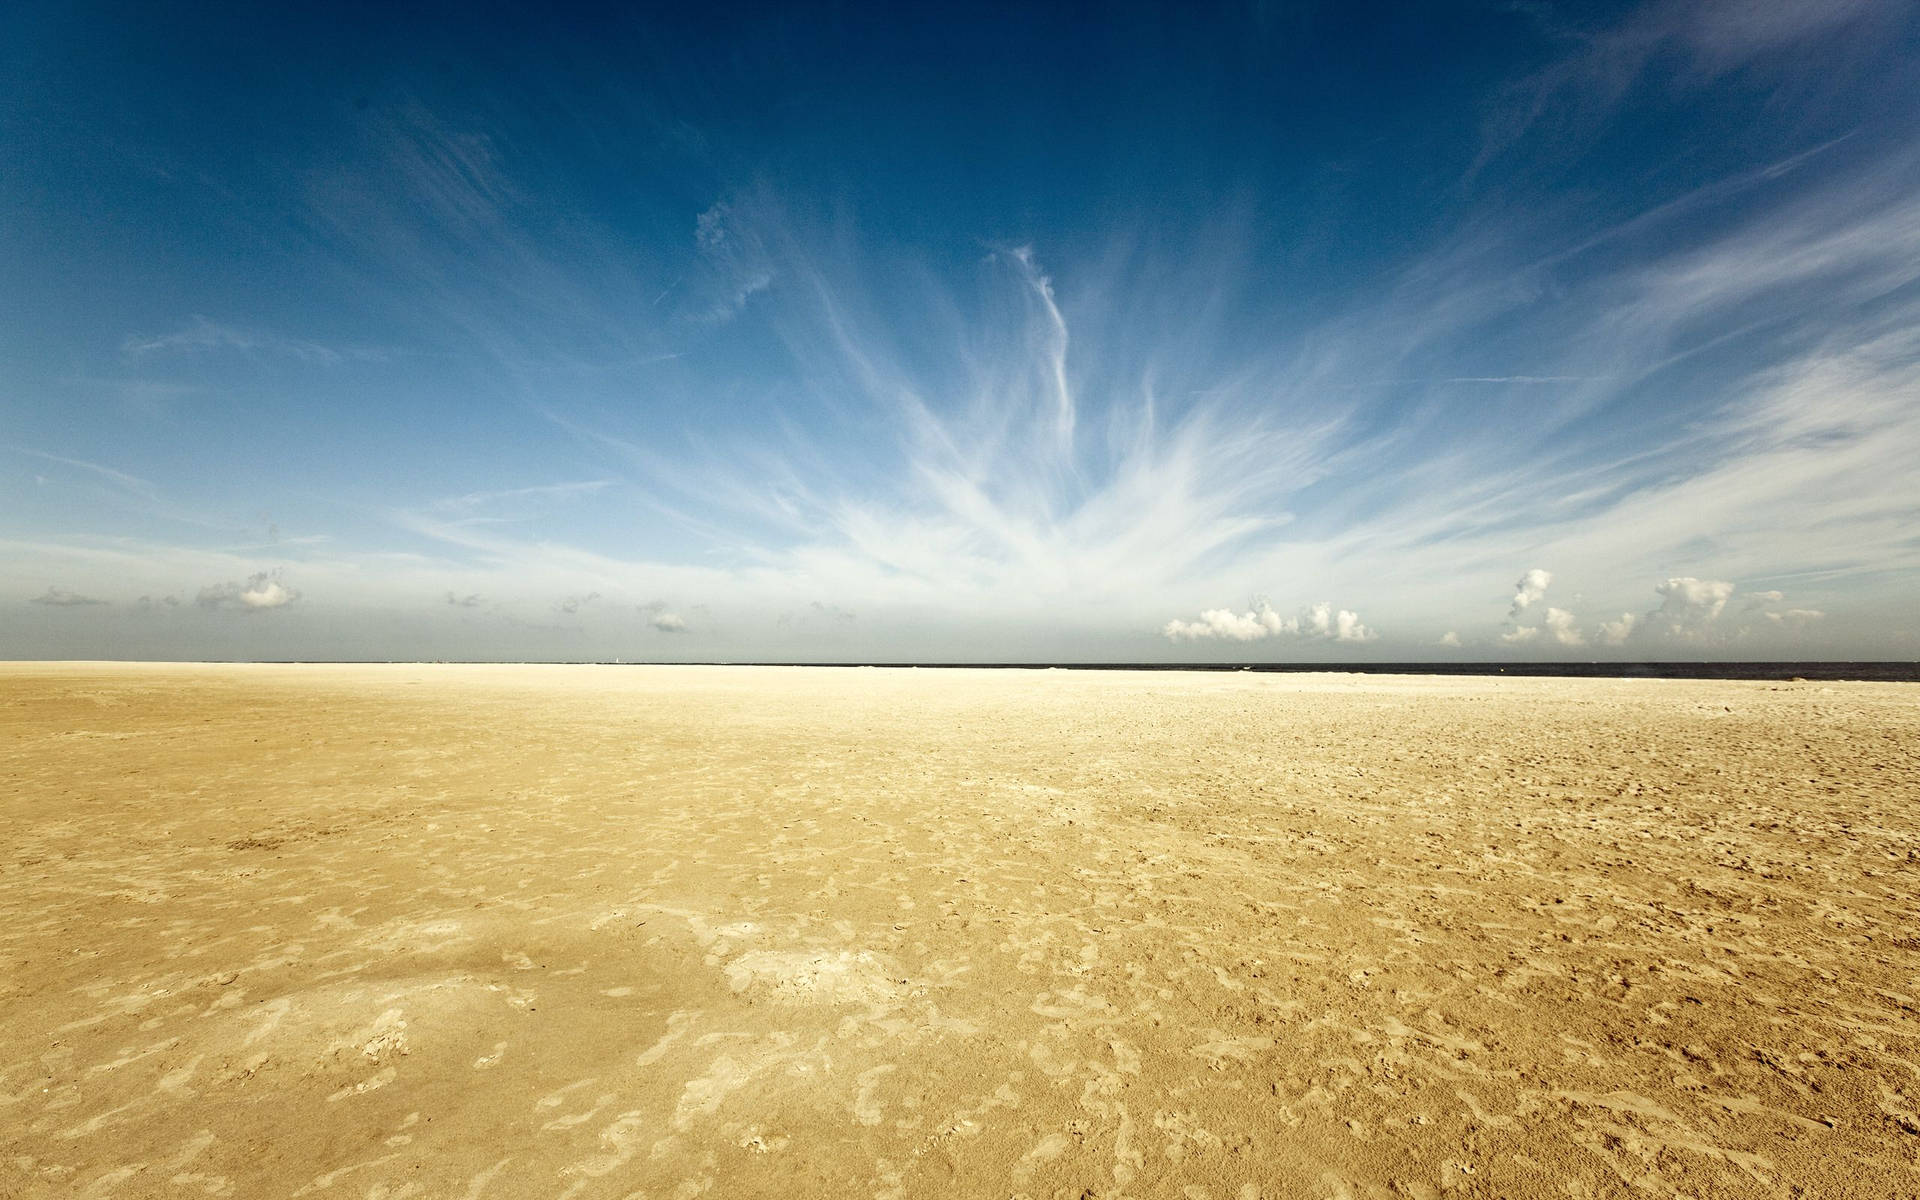 Cirrus clouds and blue sky over the white gypsum sand dune…